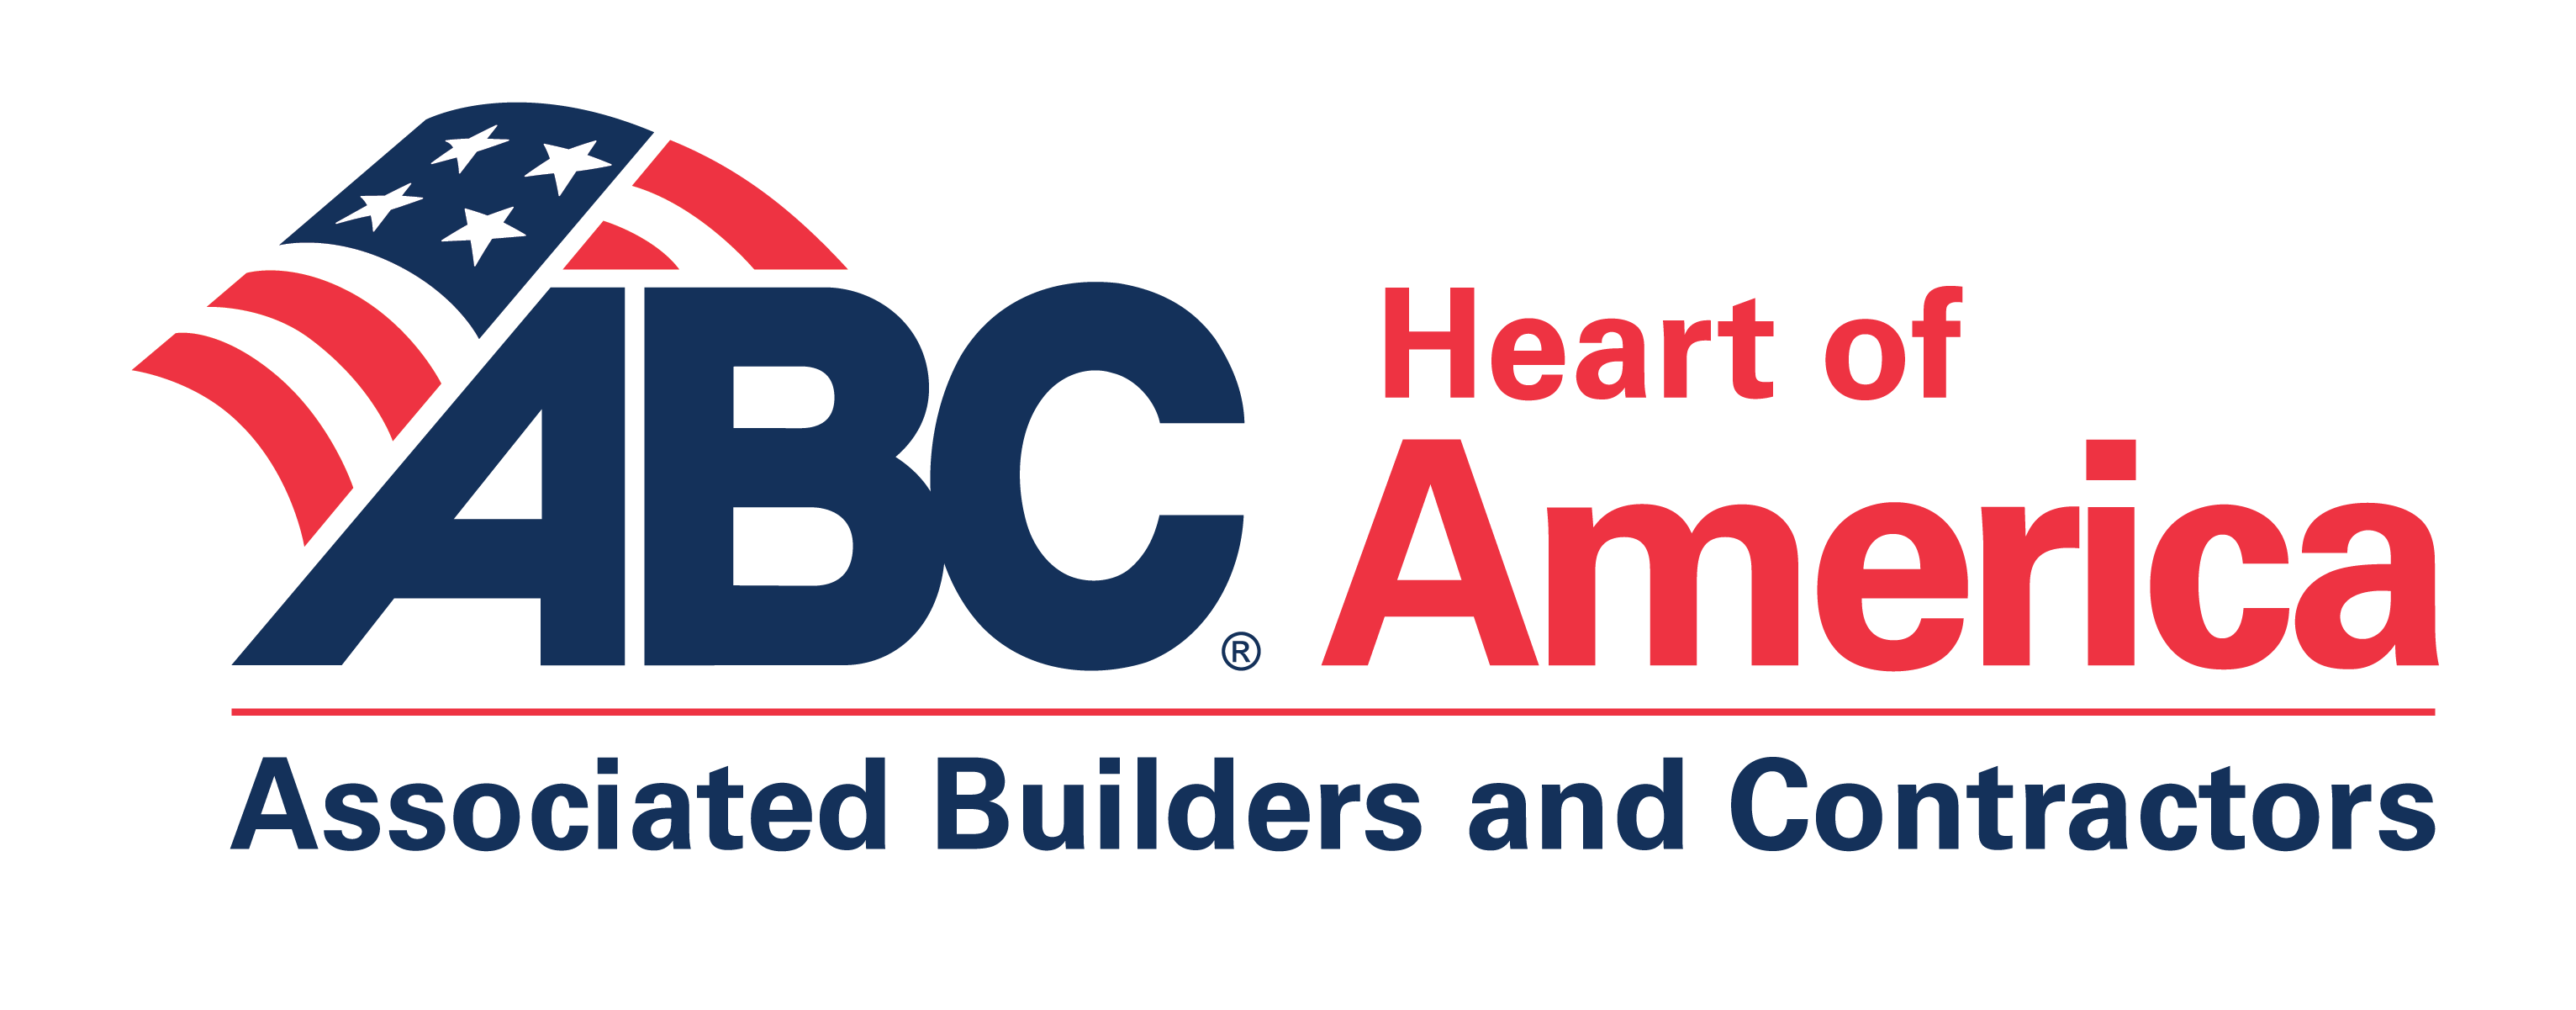 ABC Heart of America Chapter